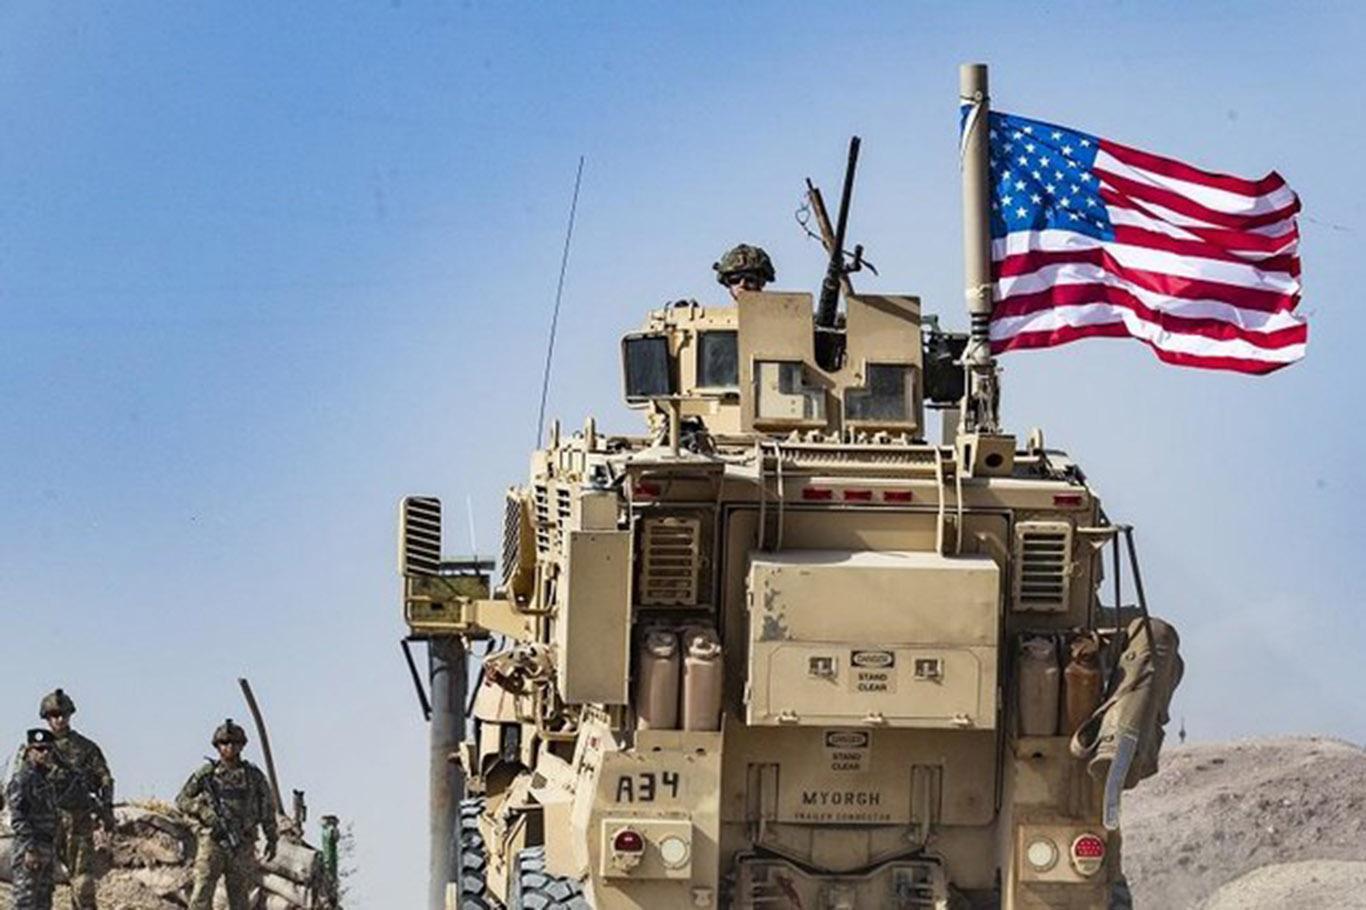 US forces leaving Syria don't have permission to stay in country, Iraq military says